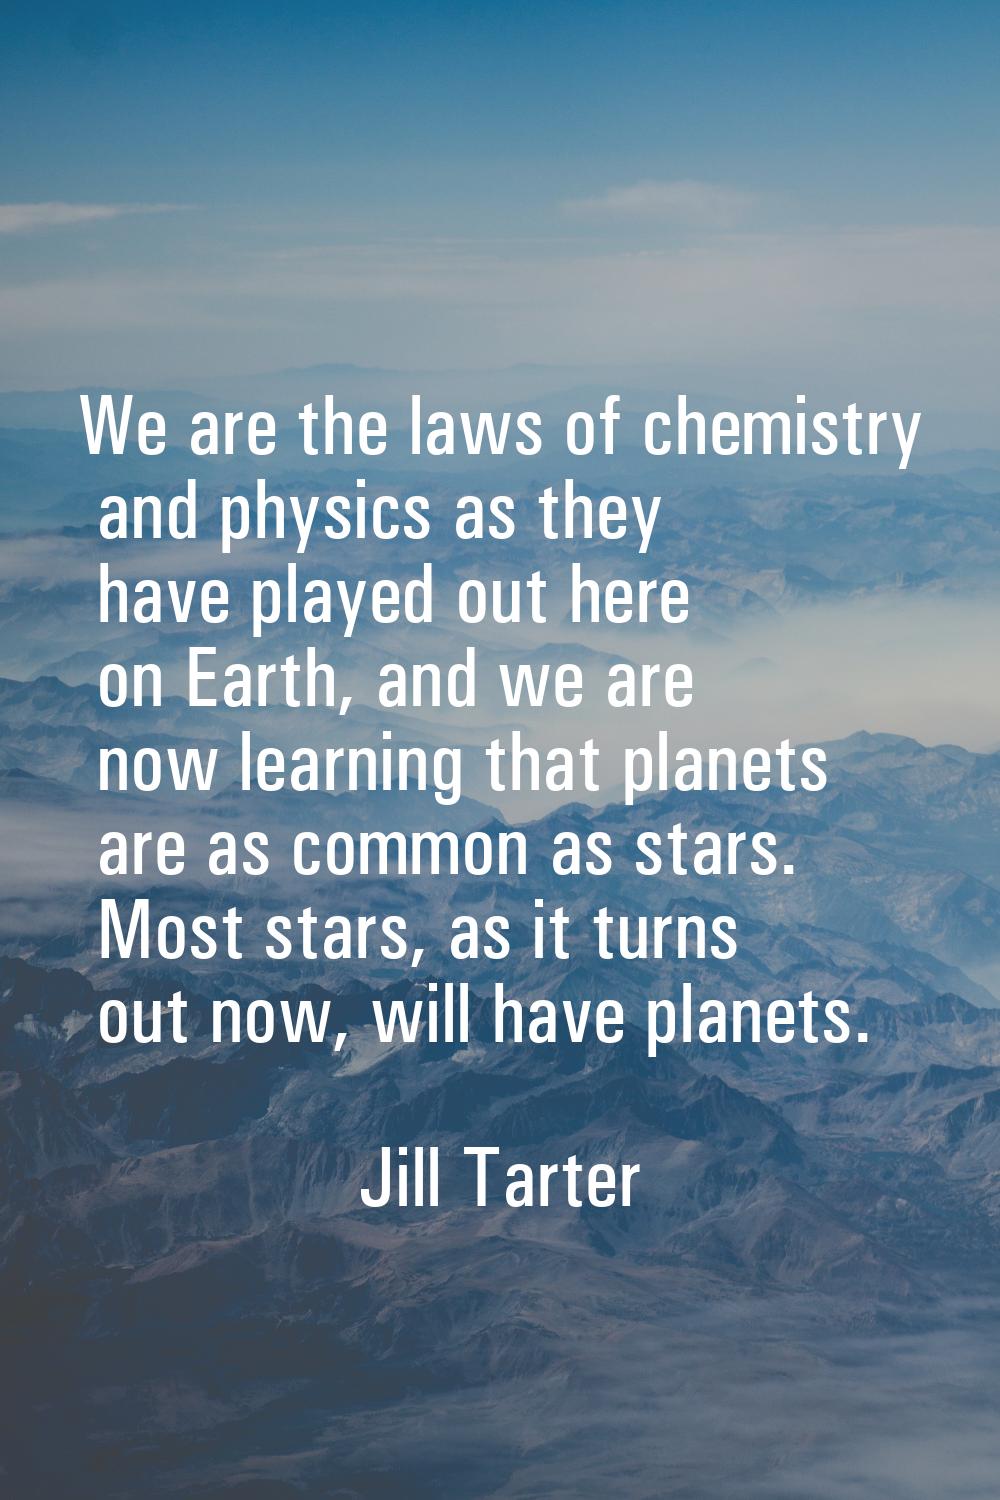 We are the laws of chemistry and physics as they have played out here on Earth, and we are now lear